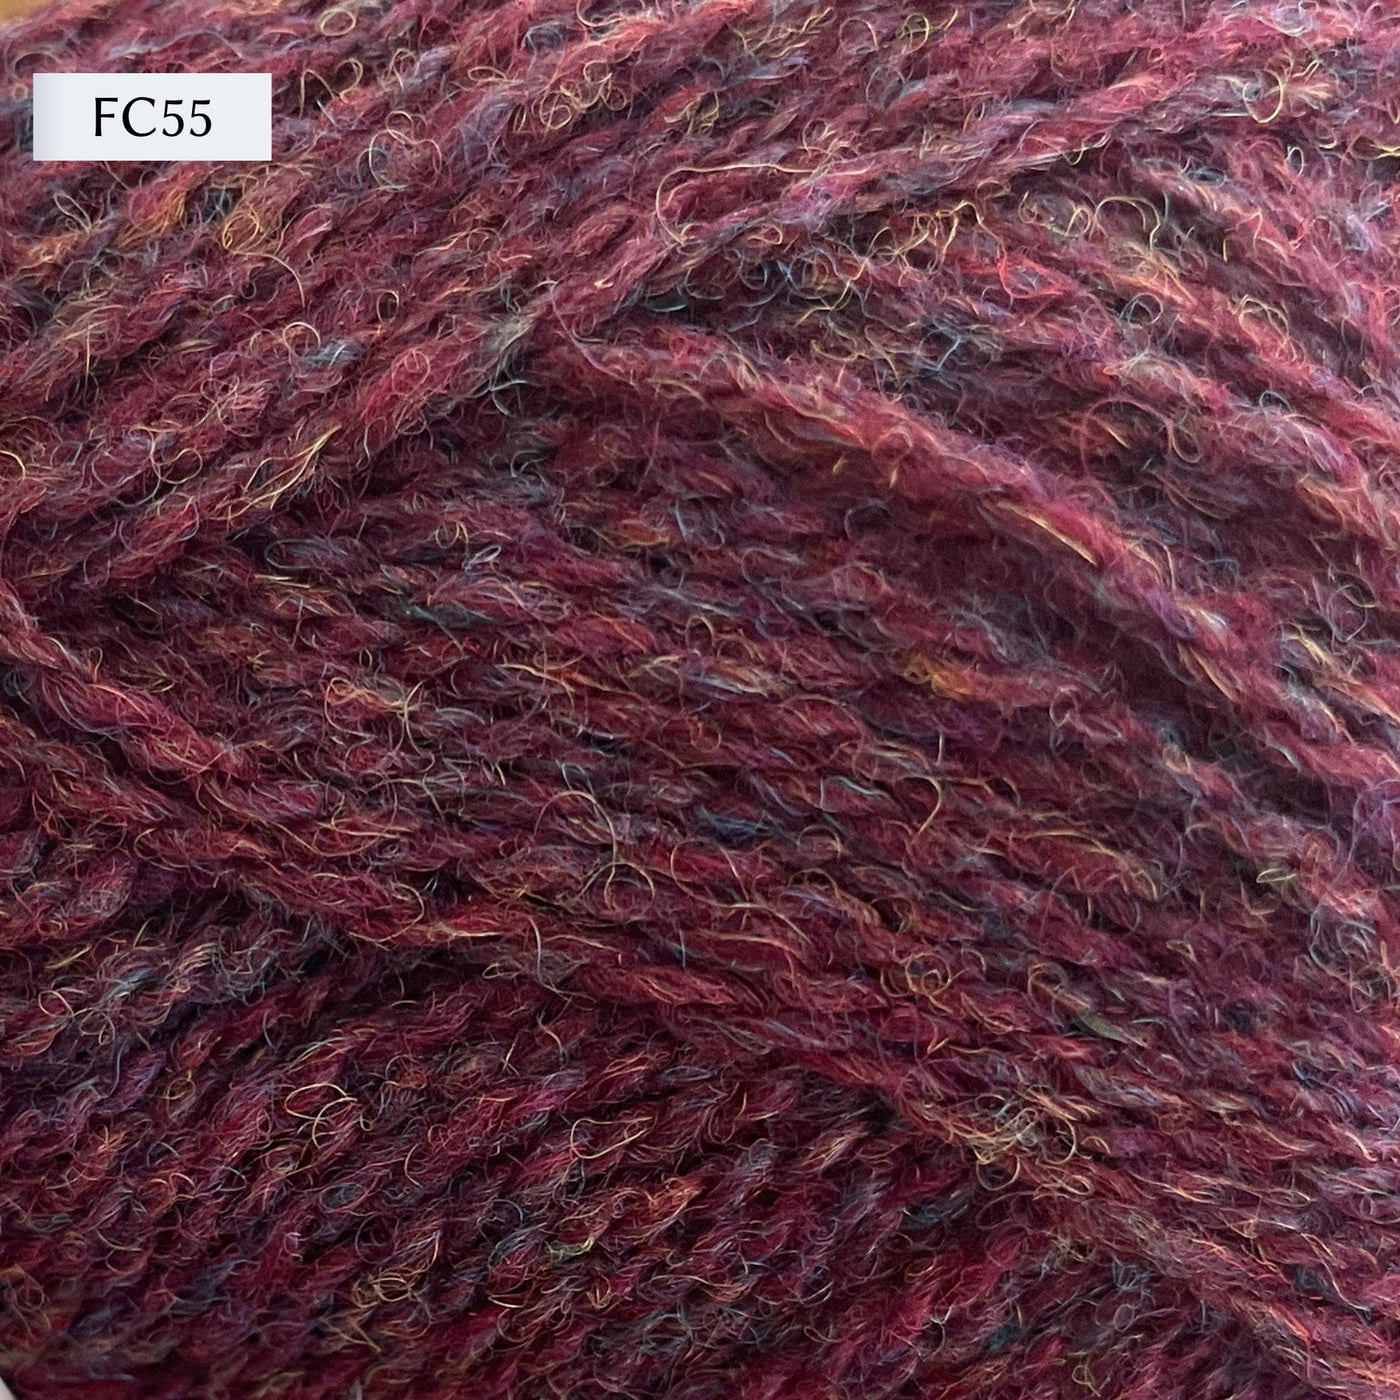 Jamieson & Smith 2ply Jumper Weight, light fingering weight yarn, in color FC55, a maroon heathered with purple, black, and orange